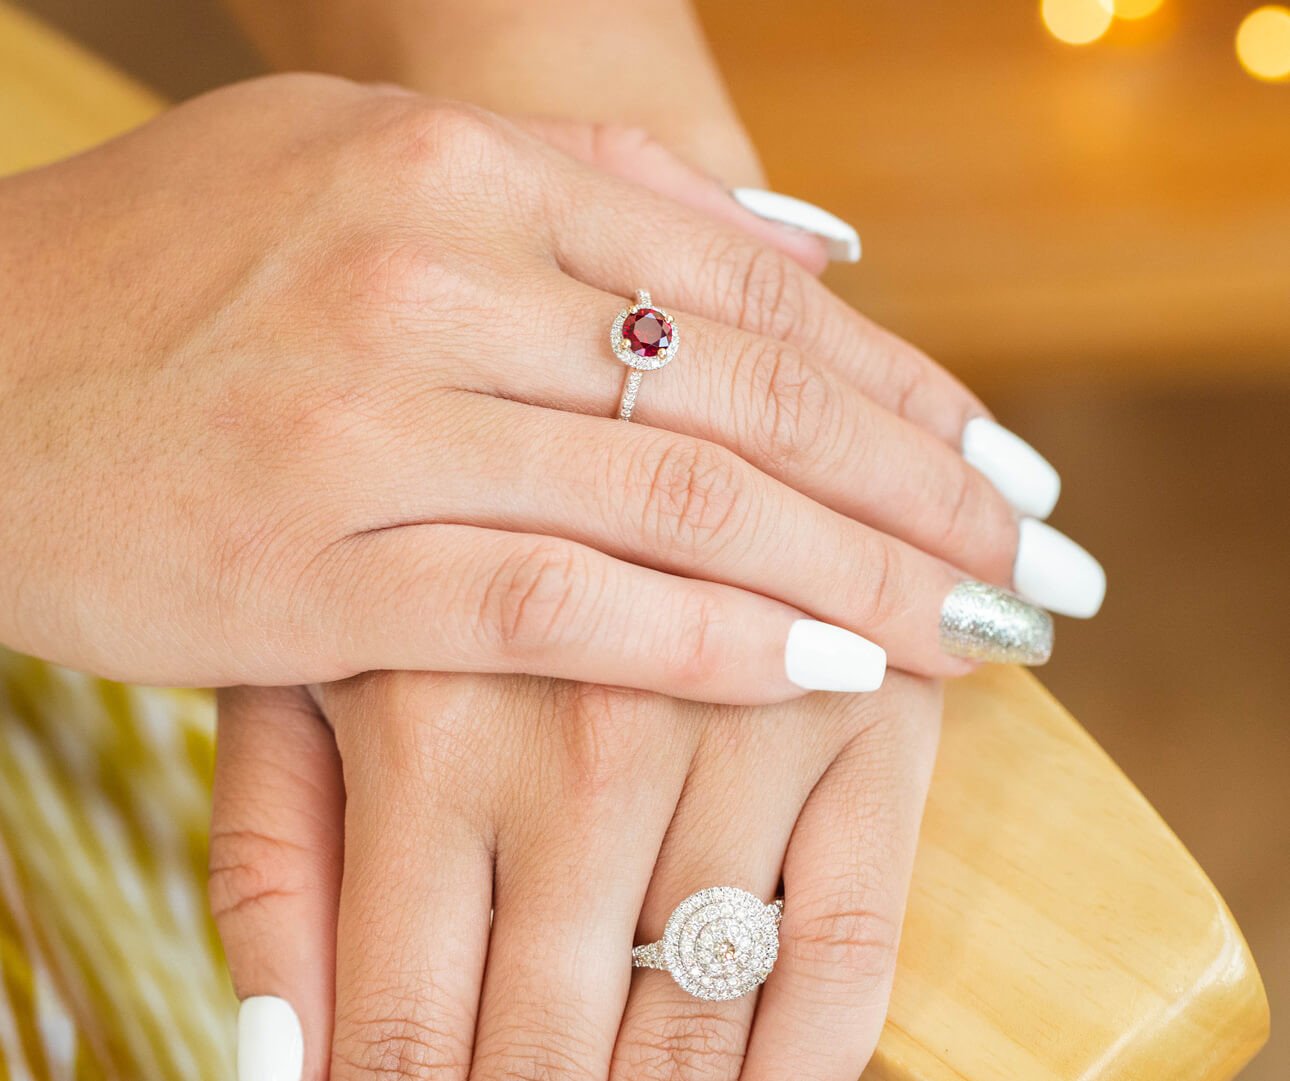 How To Wear Your Wedding Rings: Image of ruby wedding ring on finger